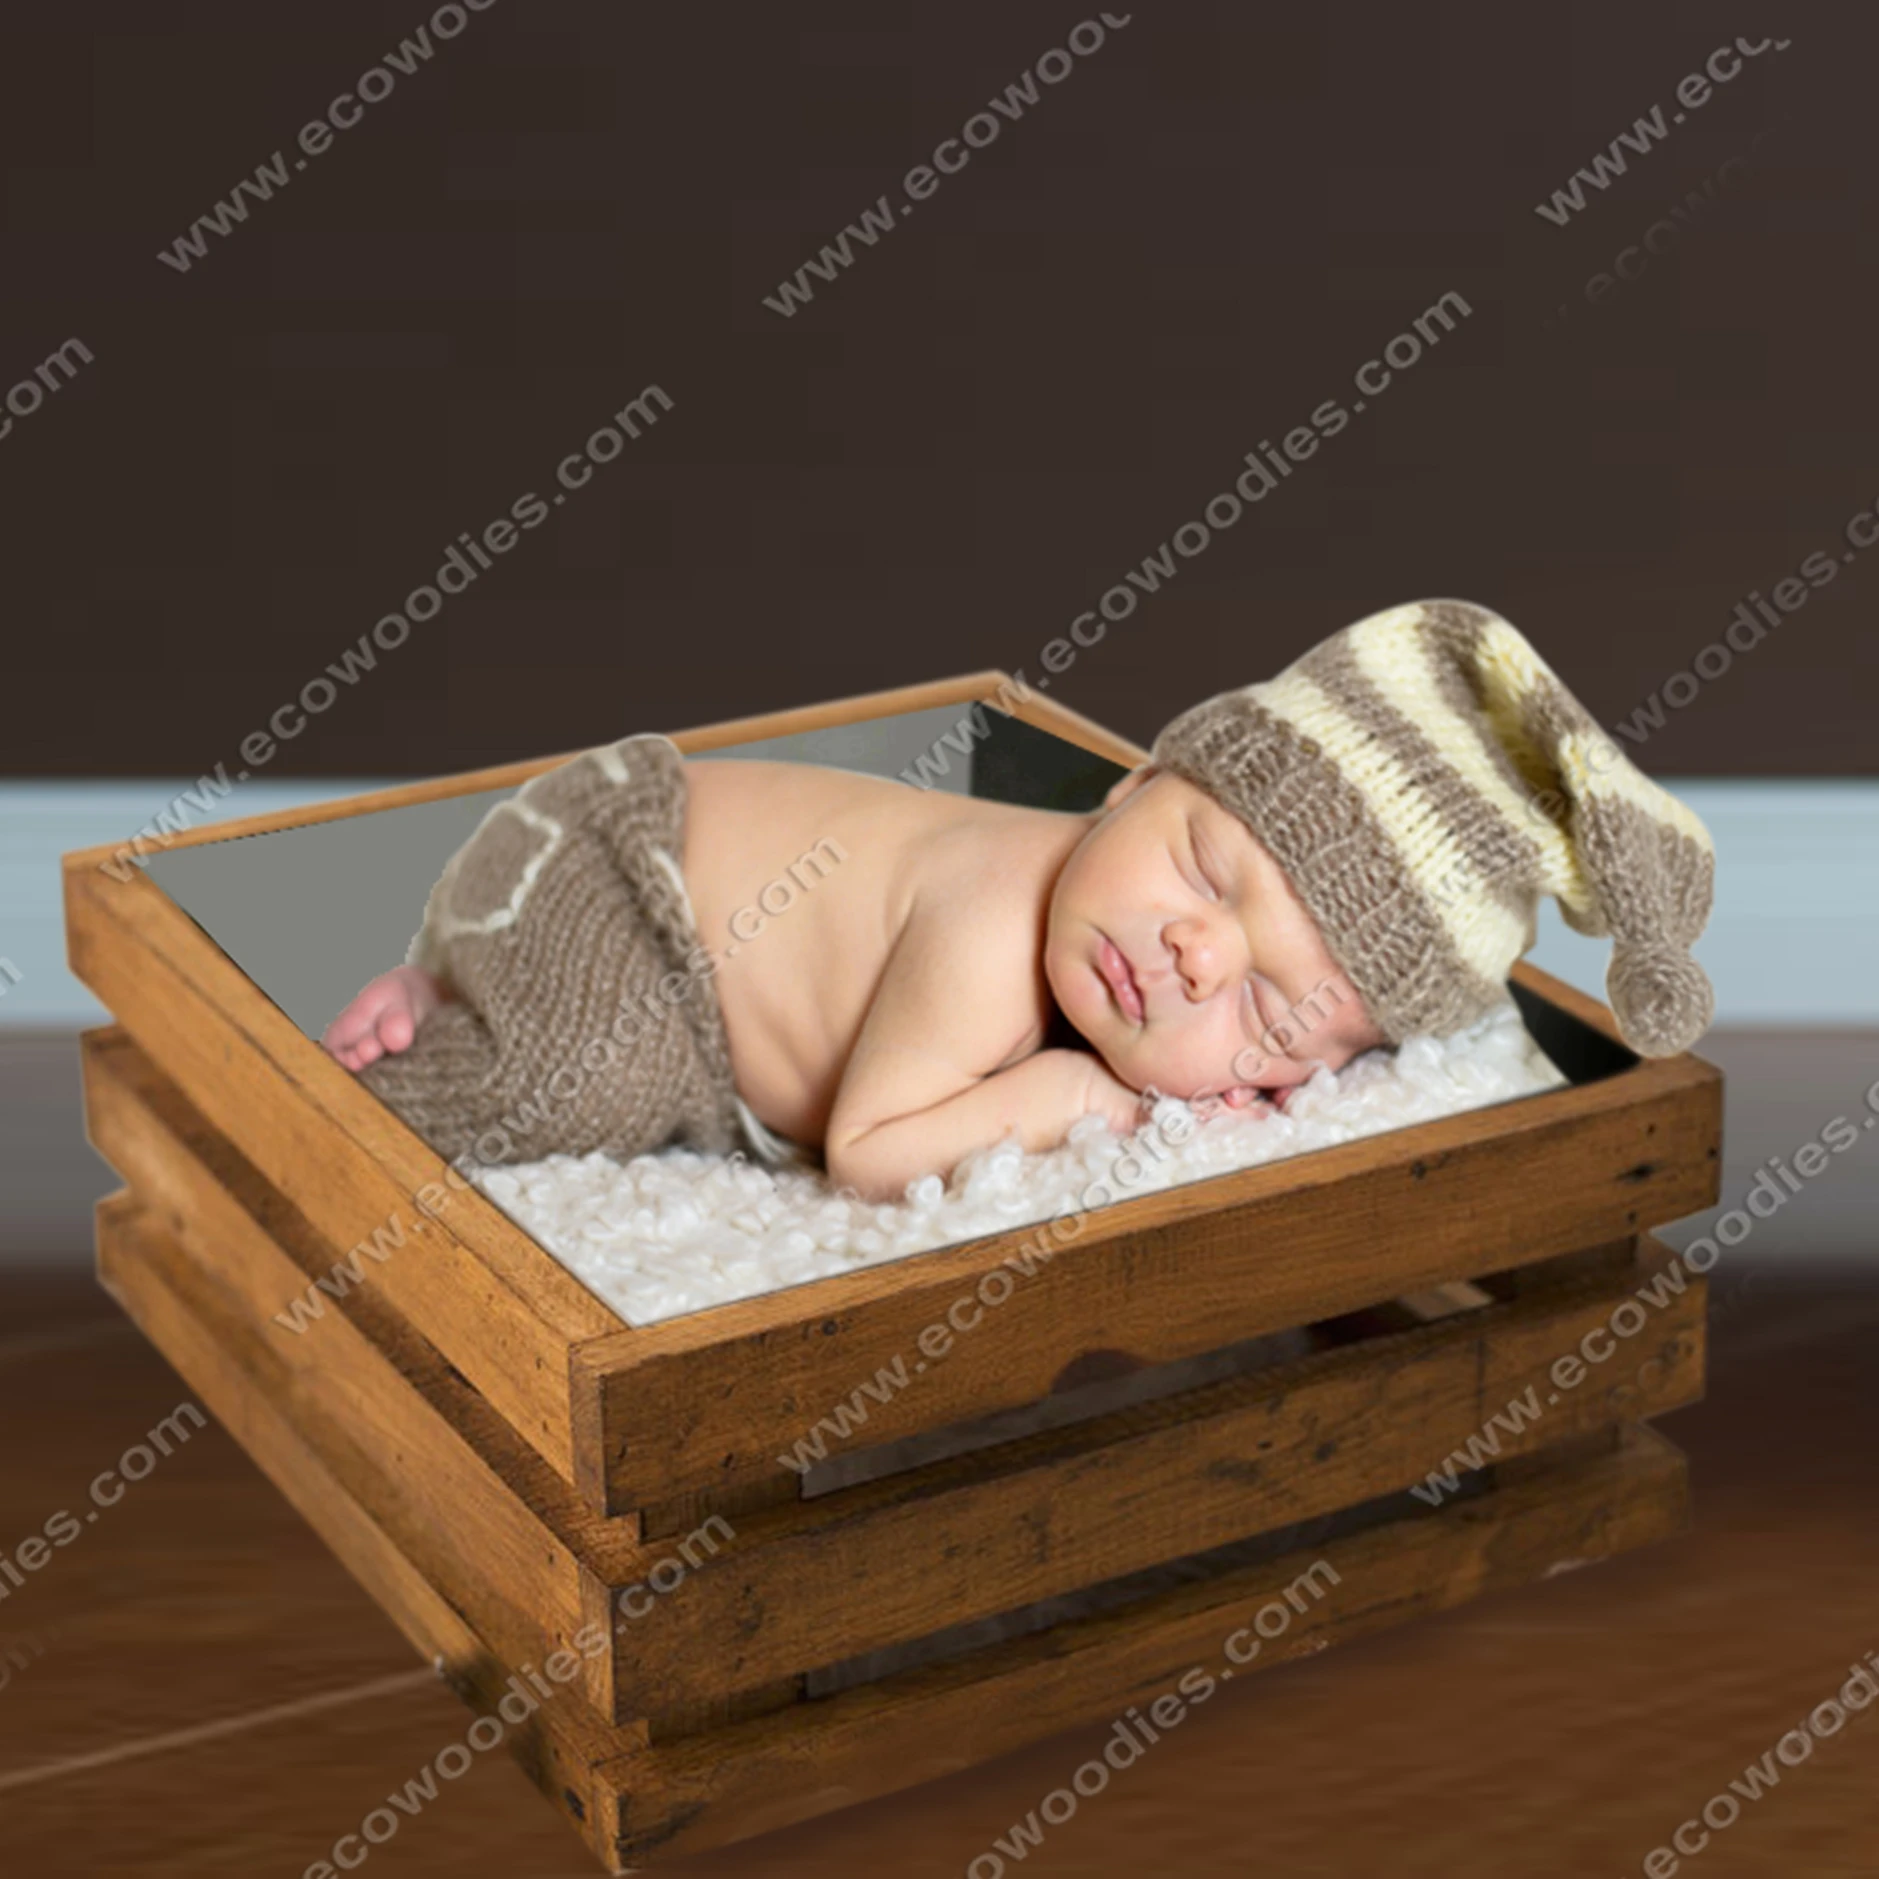 vintage bed brown bed handmade bed doll bed newborn props maternity gift vintage photo prop Ready to ship wooden bed photo prop